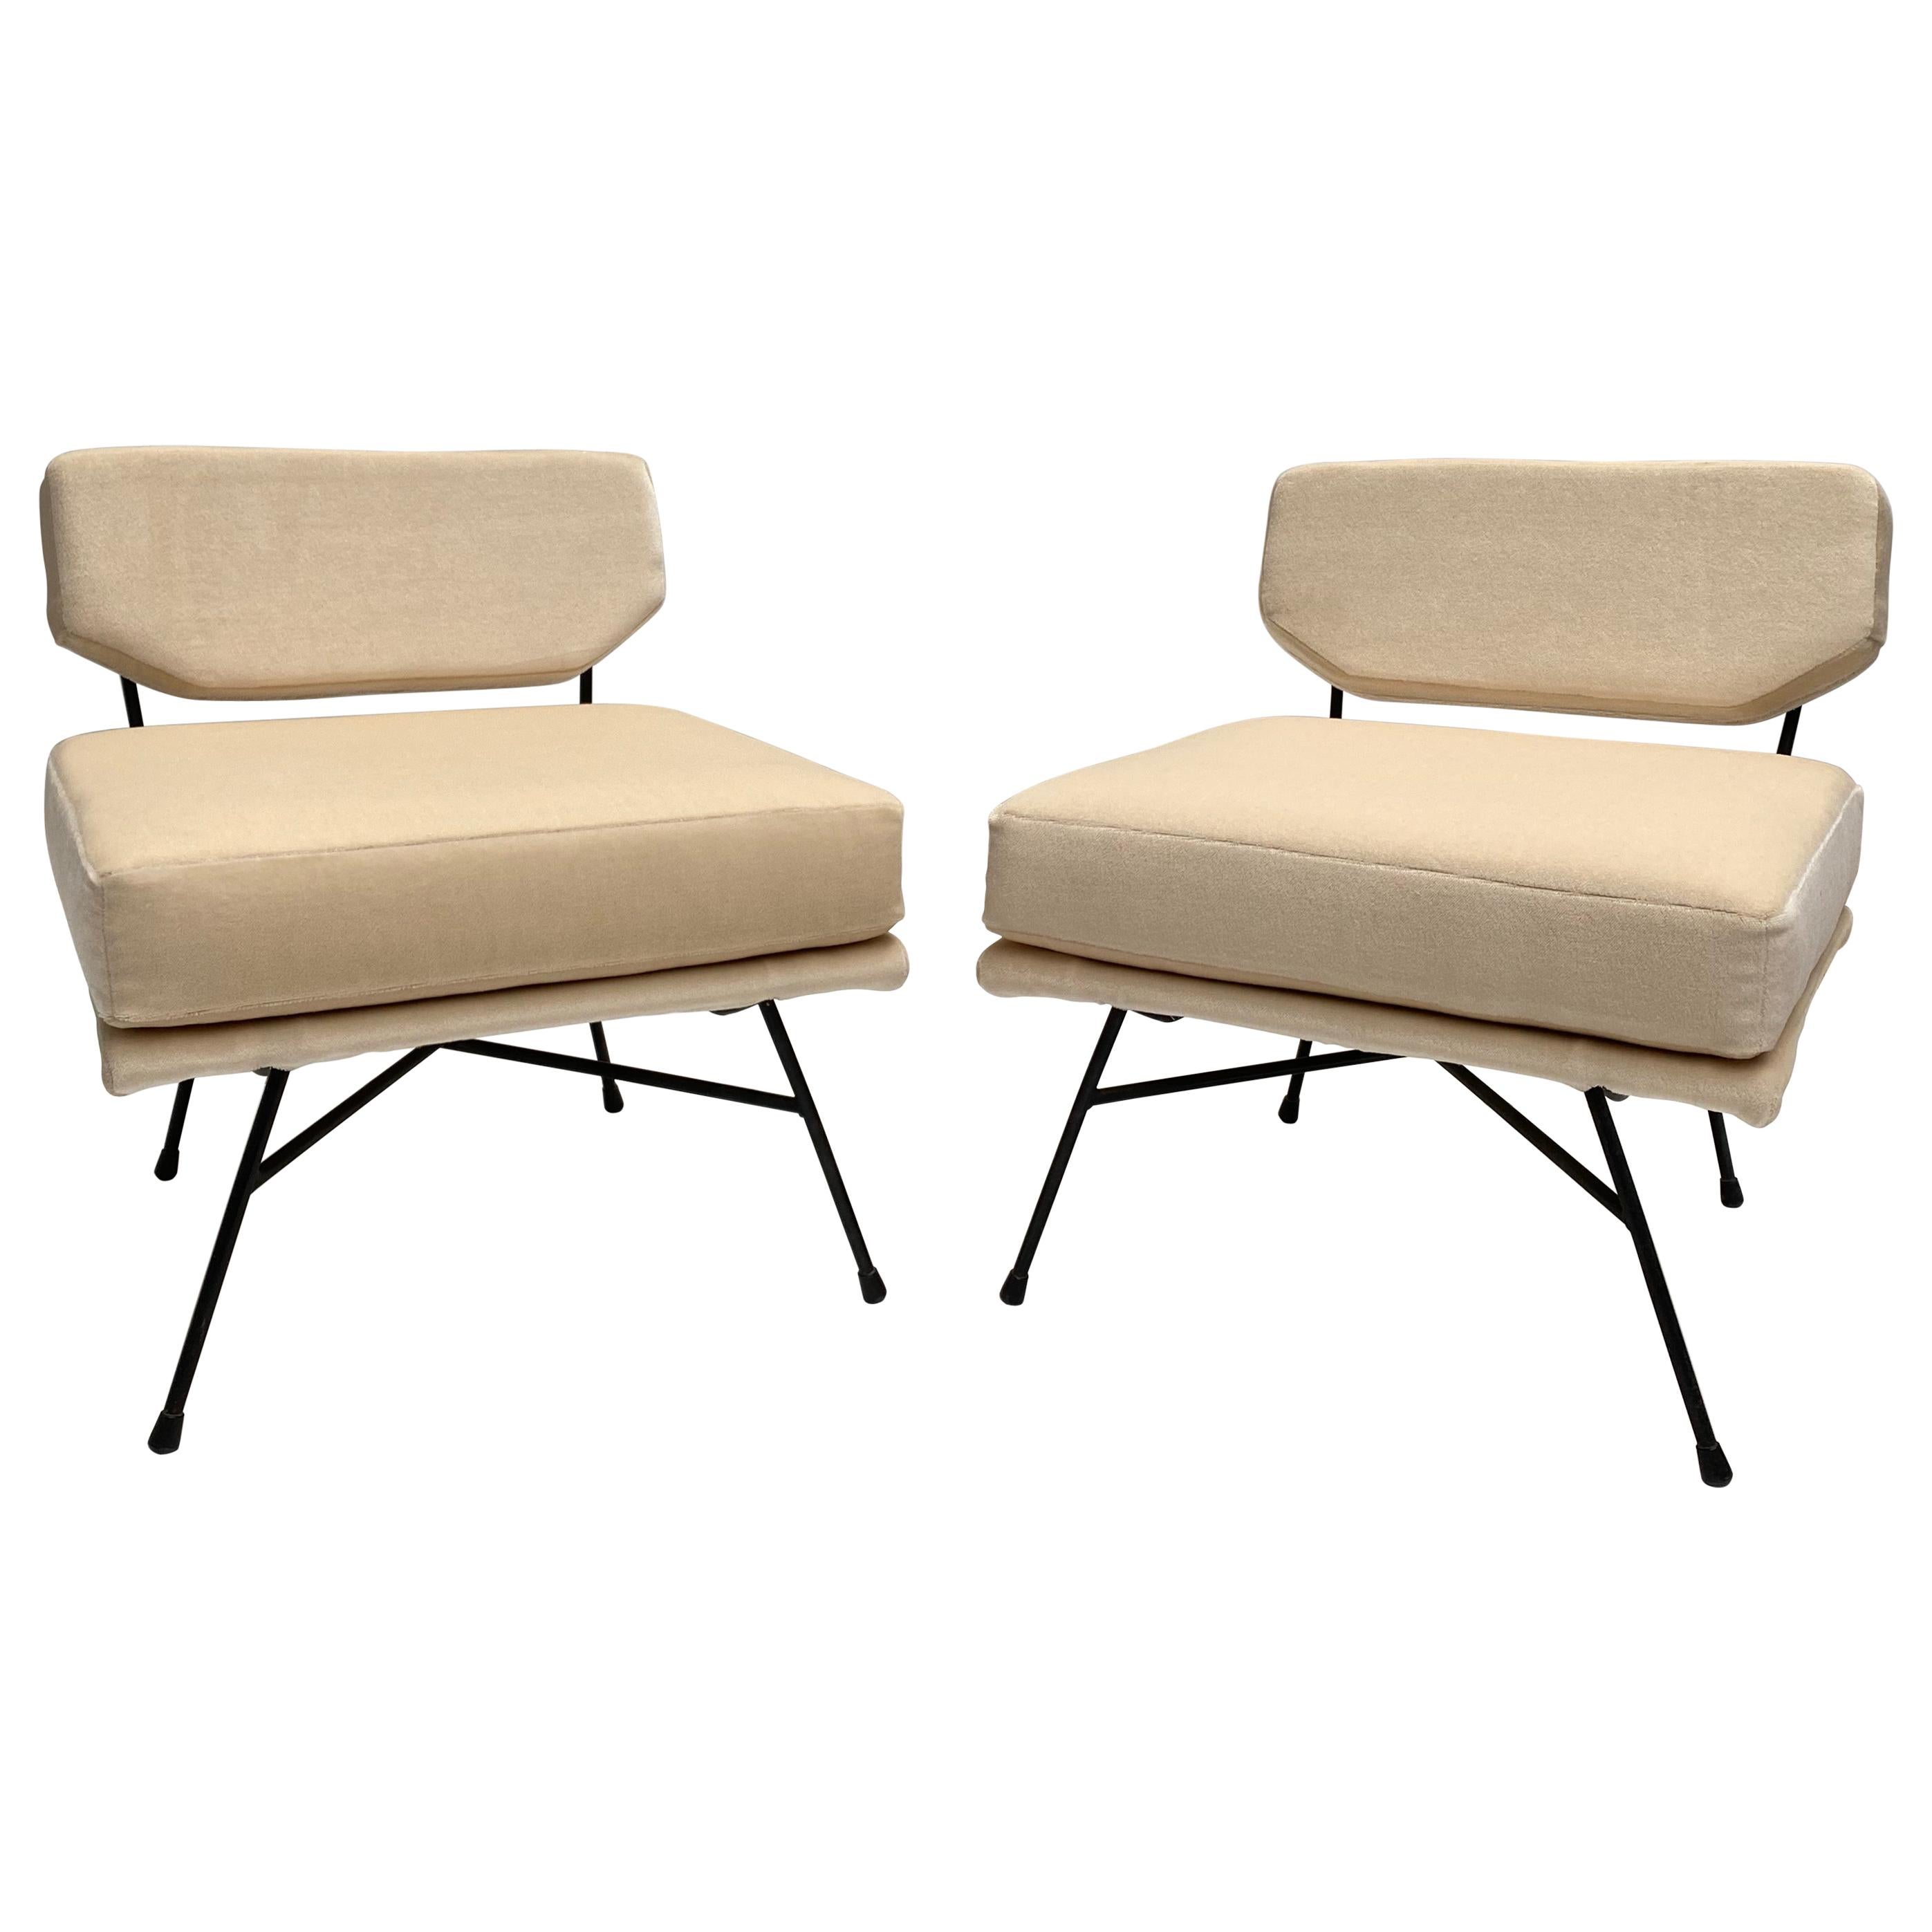 Pair of 'Elettra' Lounge Chairs by BBPR, Arflex, Italy 1953, Compasso D'Oro 1954 For Sale